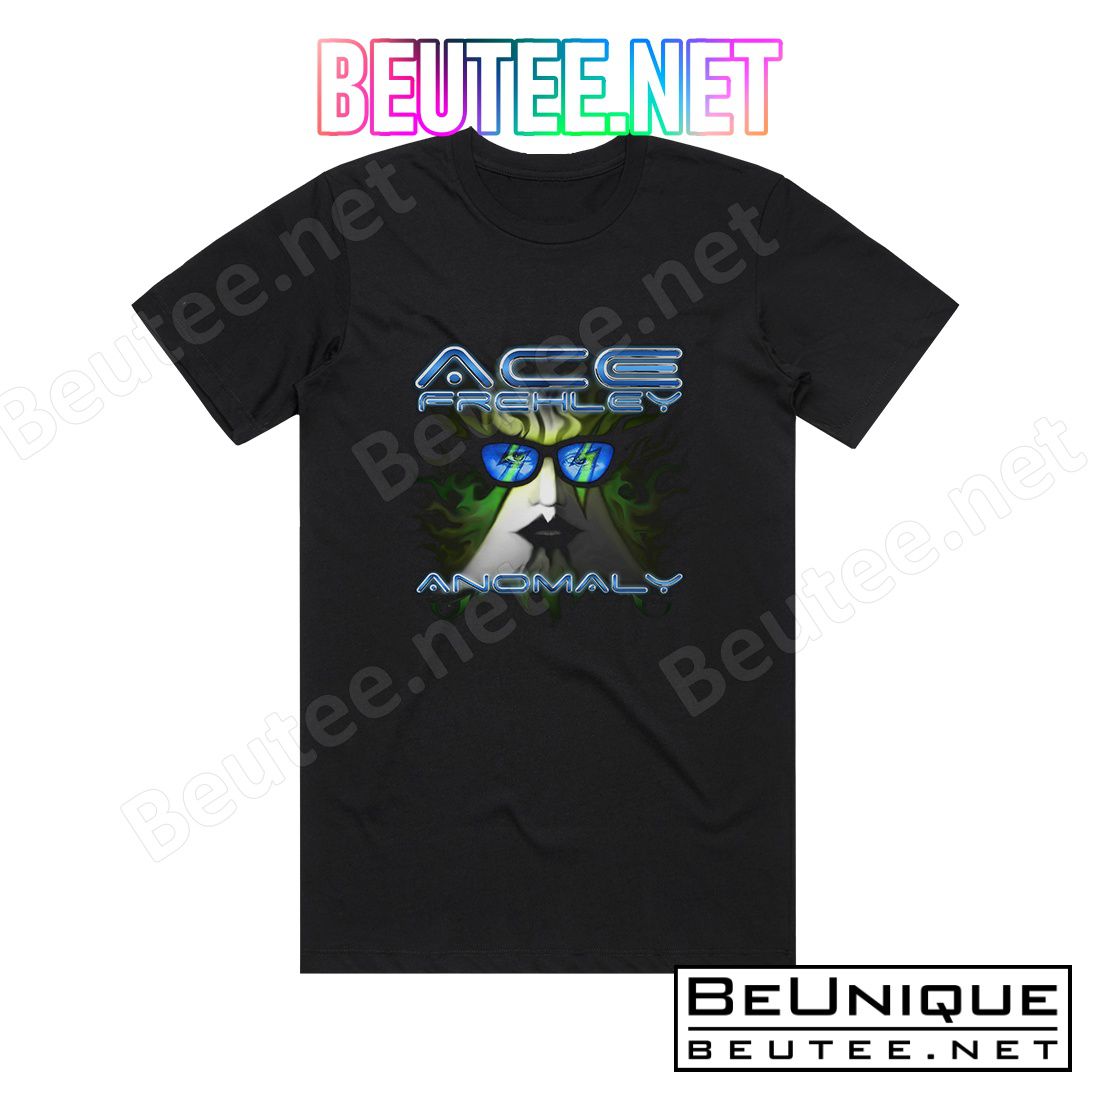 Ace Frehley Anomaly 1 Album Cover T-Shirt